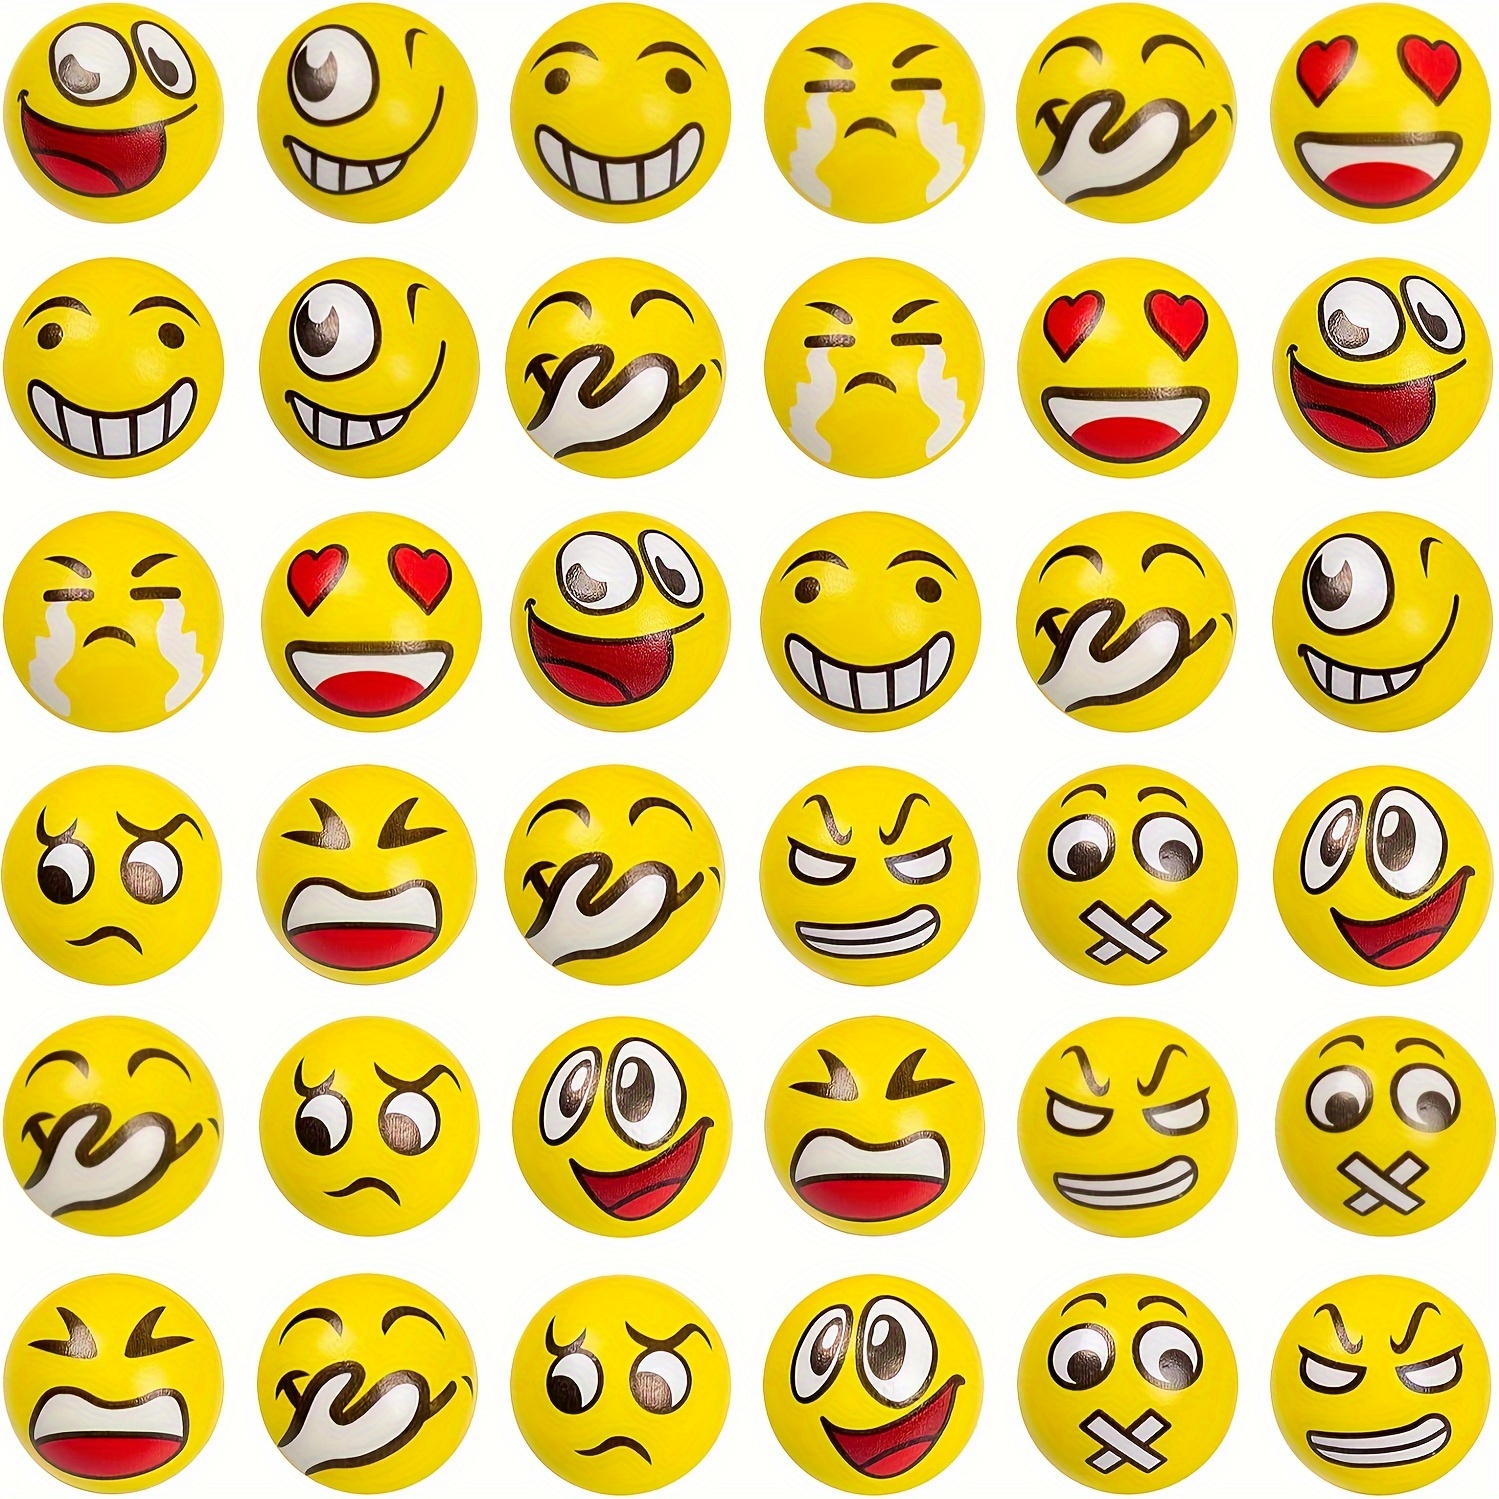 12Pcs/Pack Funny Emoji Faces Squeeze Ball Anti Stress Hand Wrist